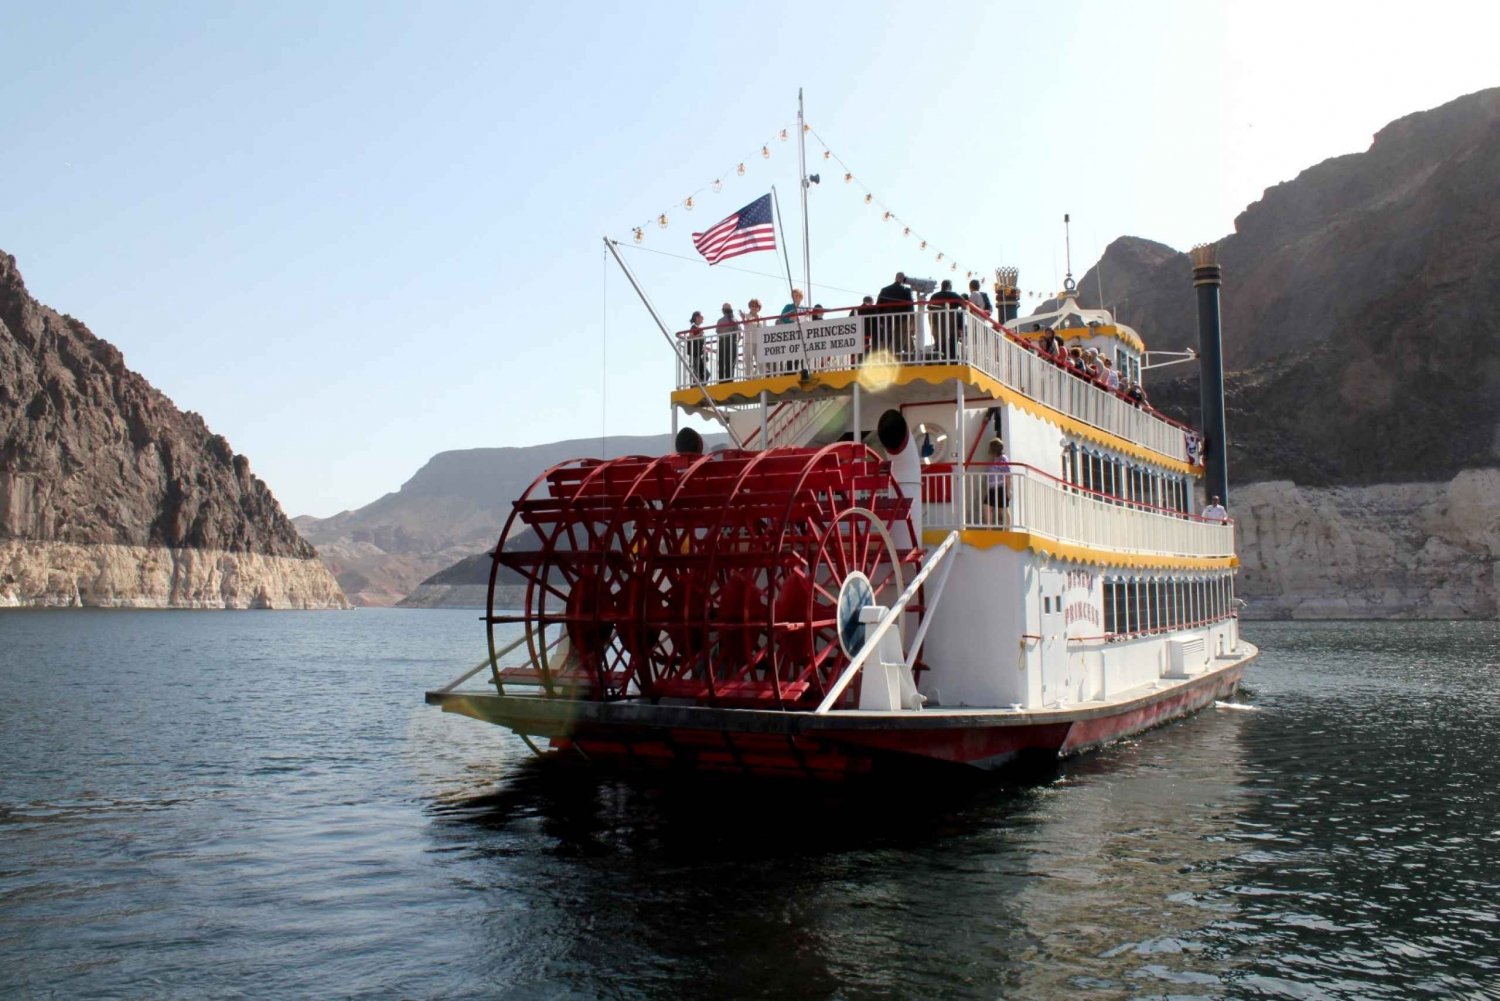 Hoover Dam: 90-minuters sightseeingkryssning vid lunchtid